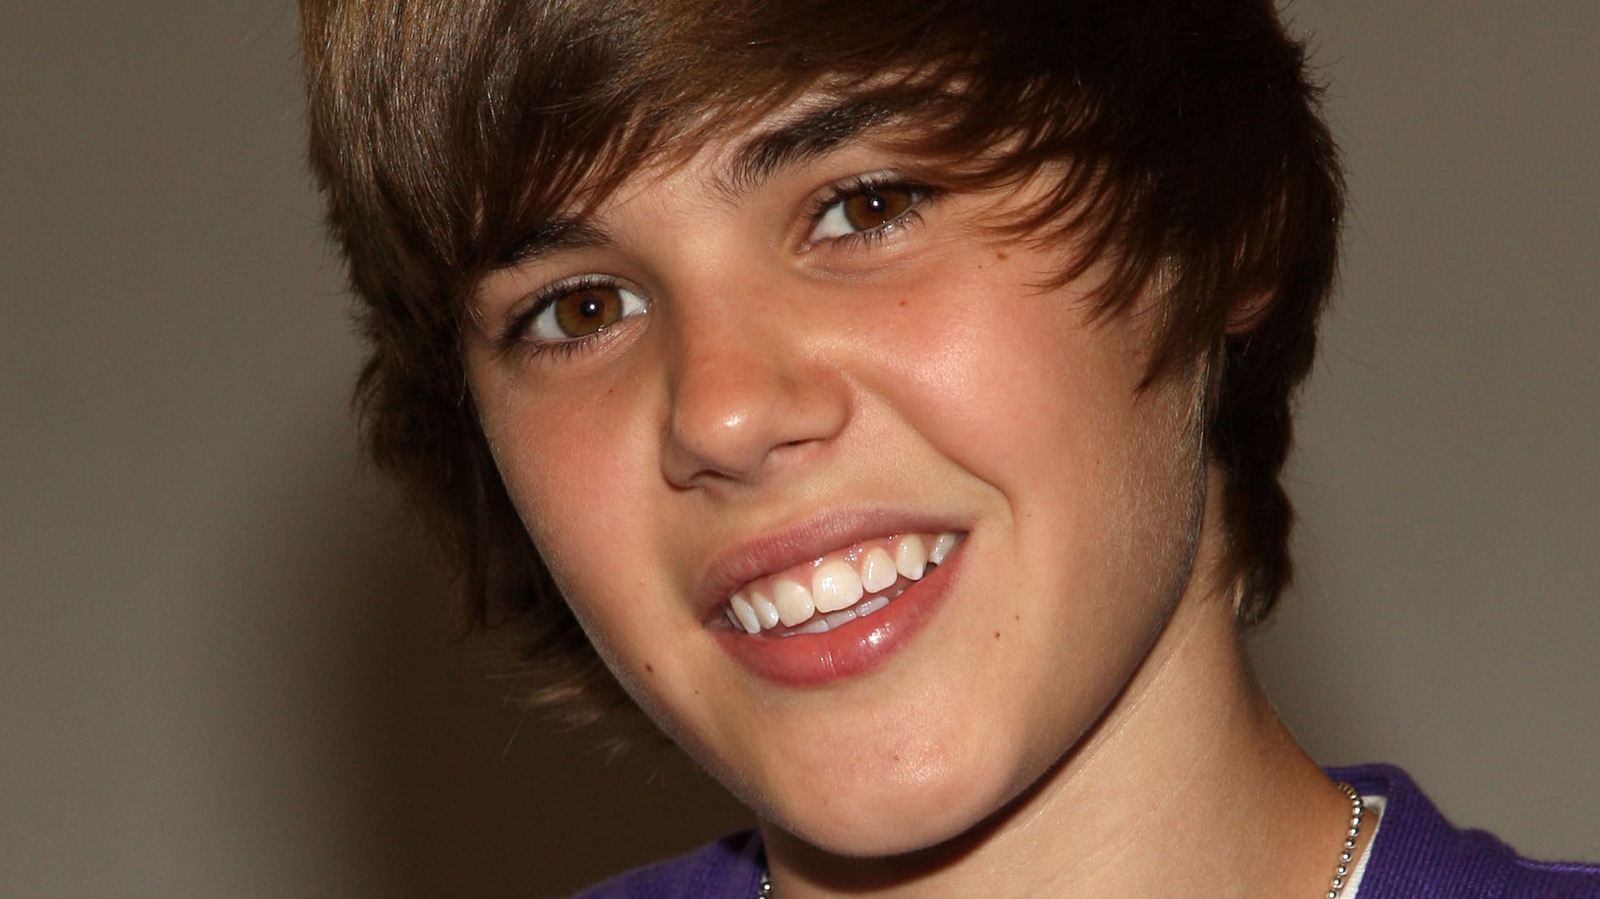 justin bieber before fame youtube